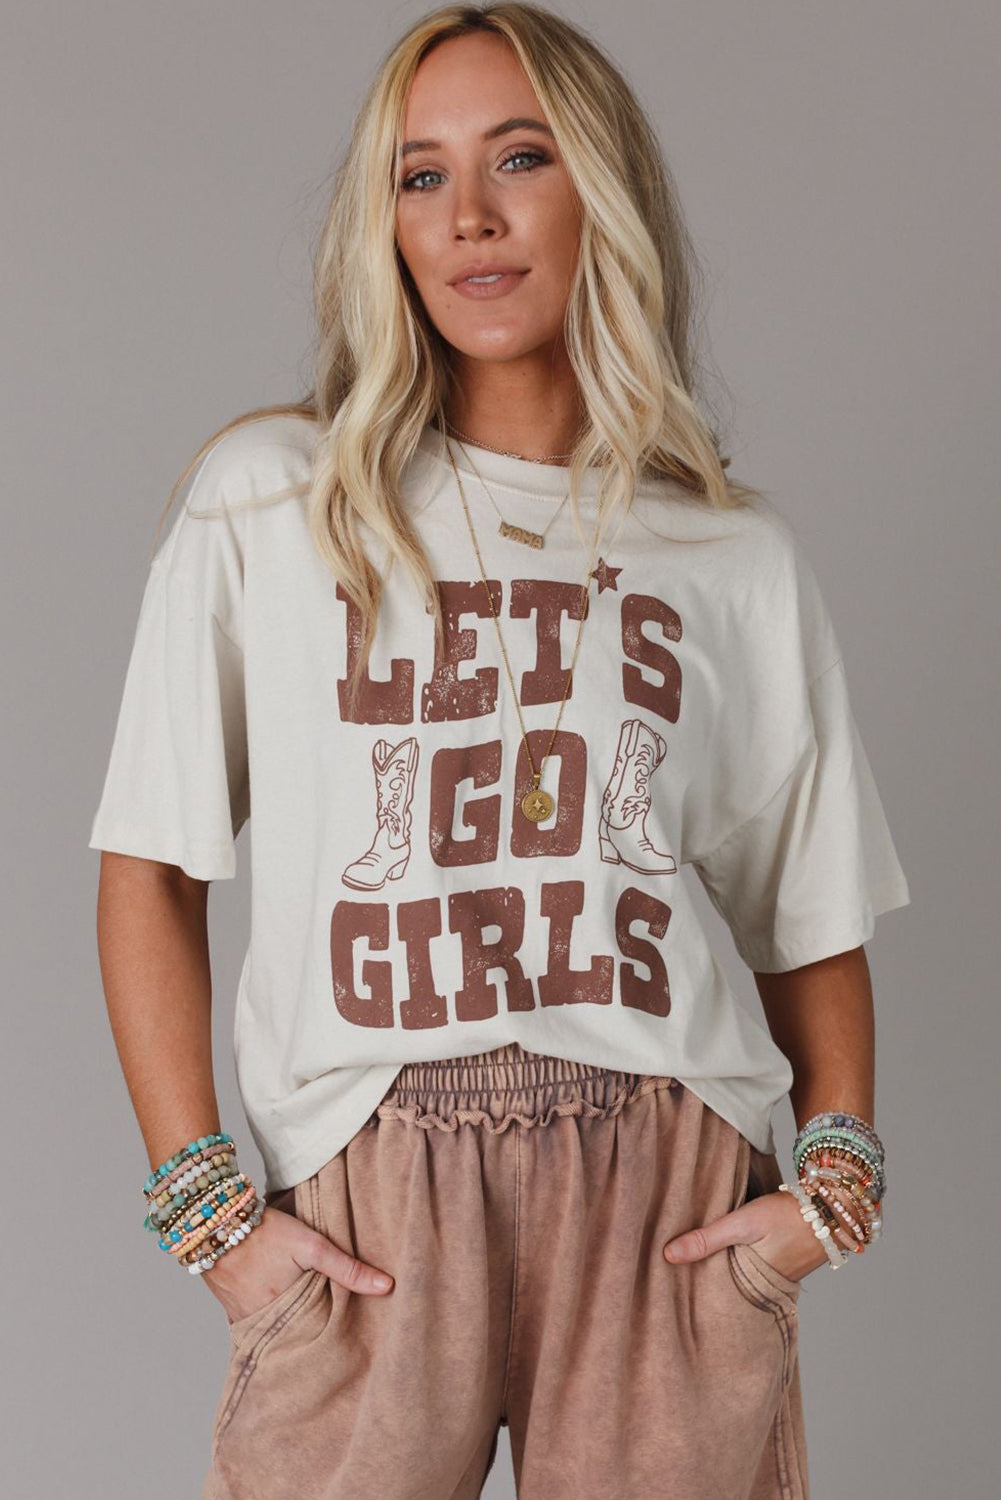 LETS GO GIRLS Western Boots Tee